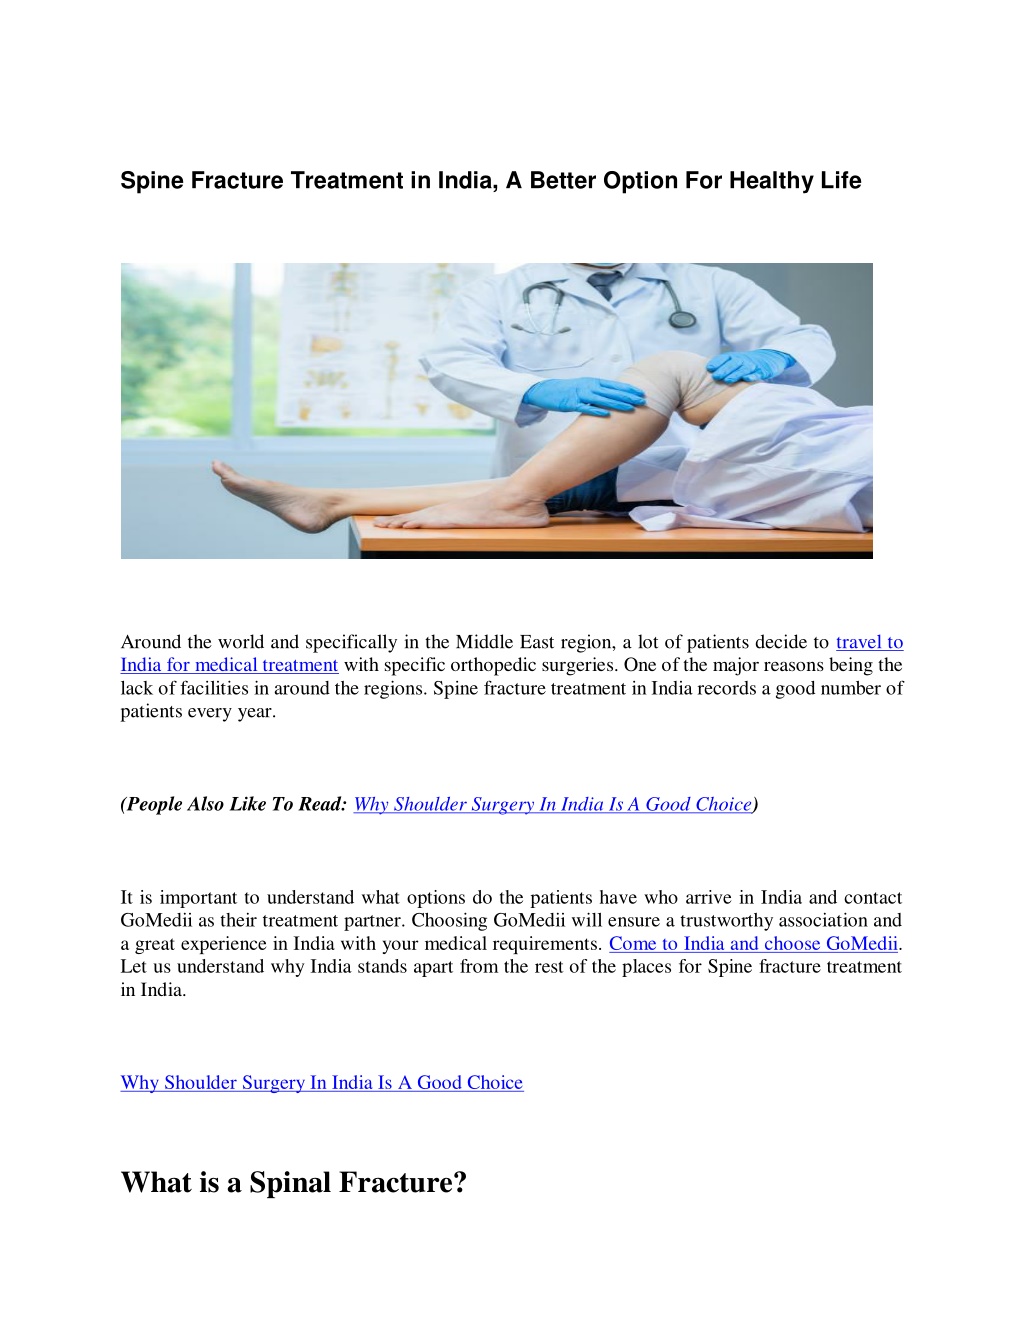 PPT - Spine Fracture Treatment In India, A Better Option For Healthy Life  PowerPoint Presentation - ID:11119329